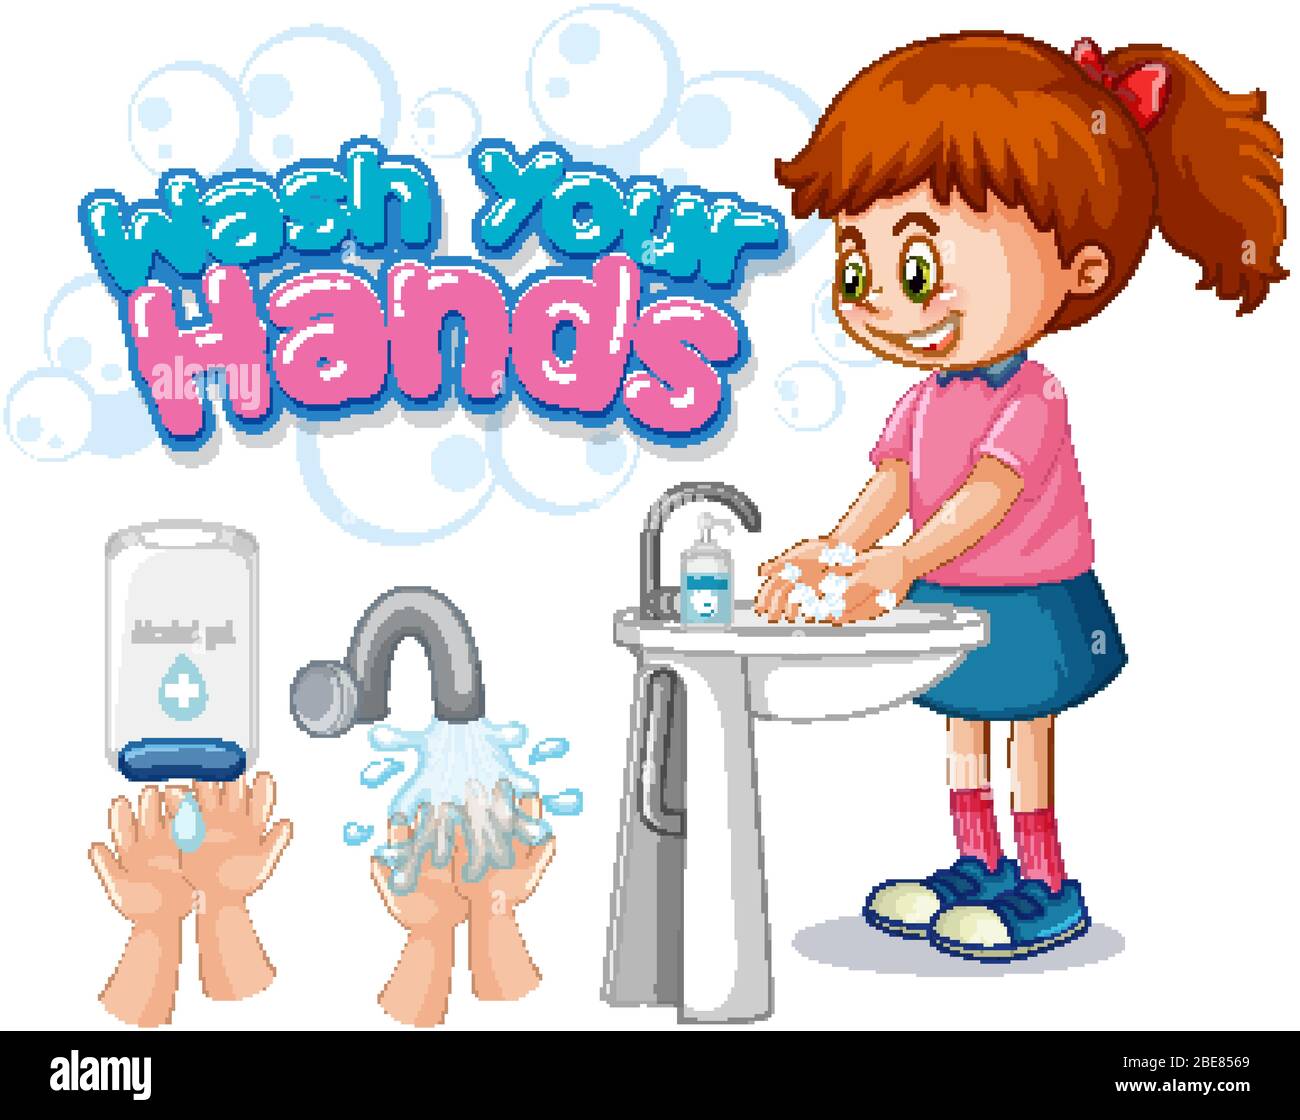 Wash your hands poster design with girl washing hands illustration ...